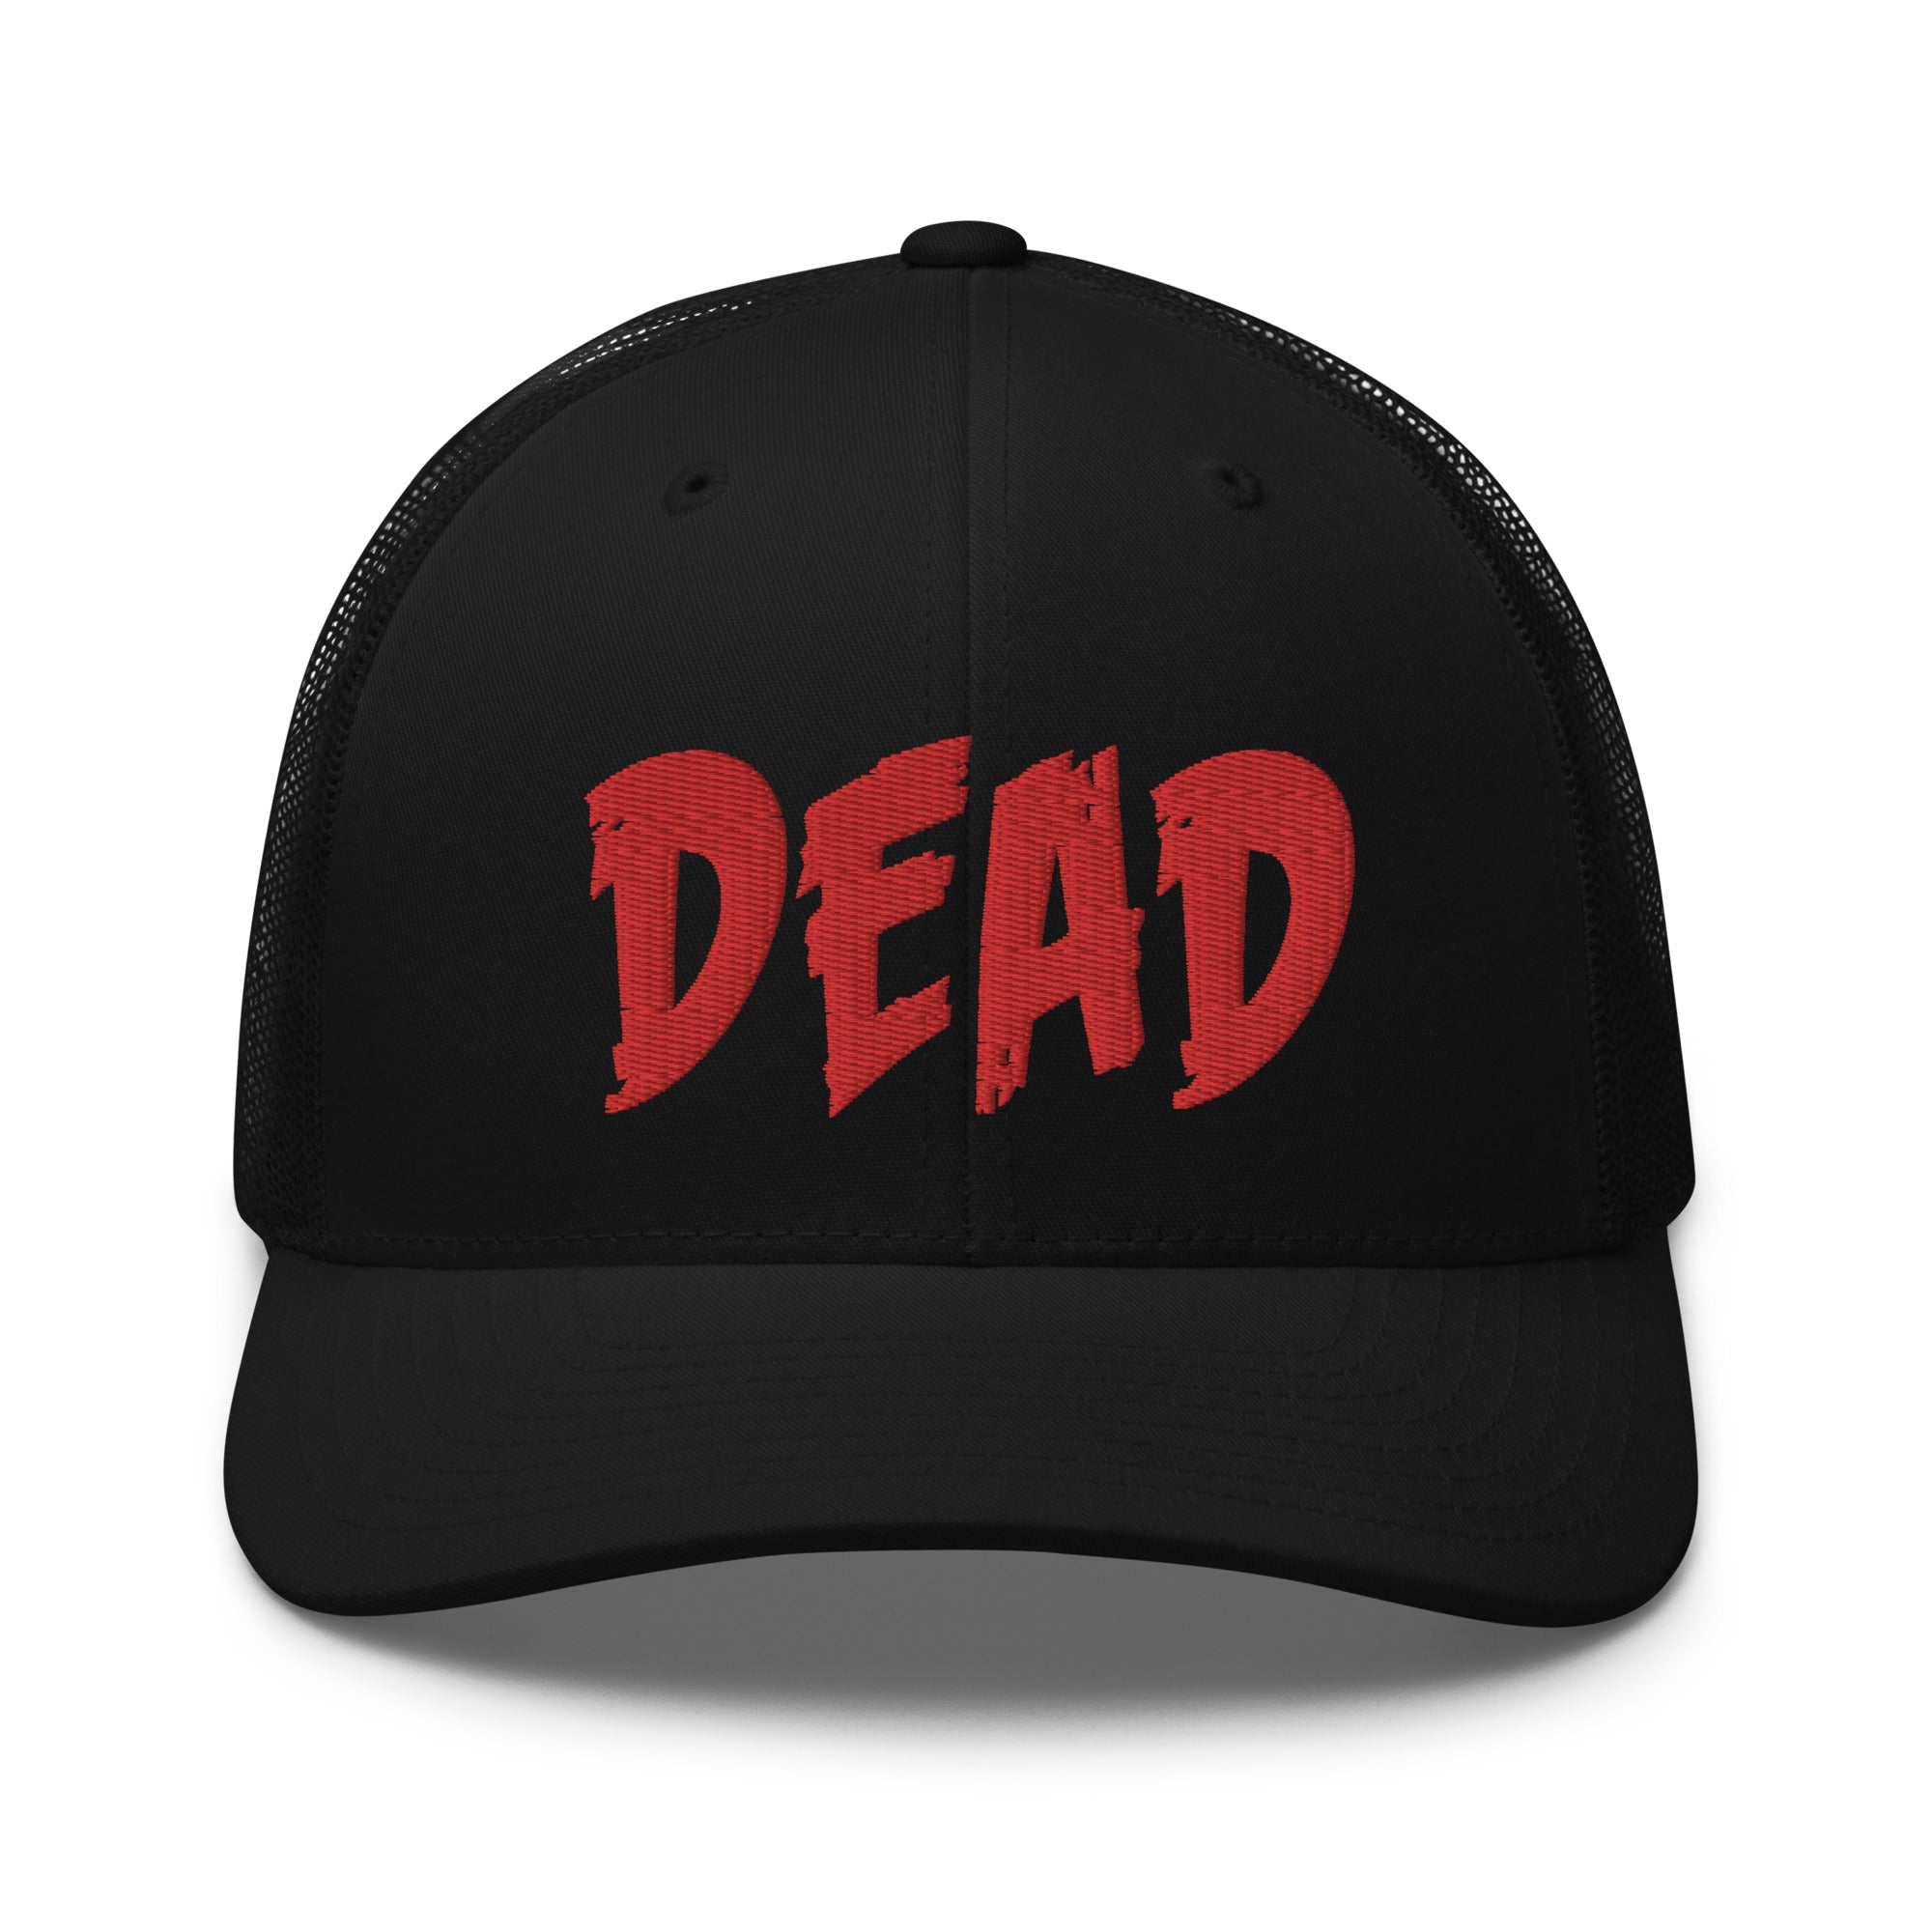 Red Thread DEAD Emotional Depression Embroidered Trucker Cap Snapback Hat